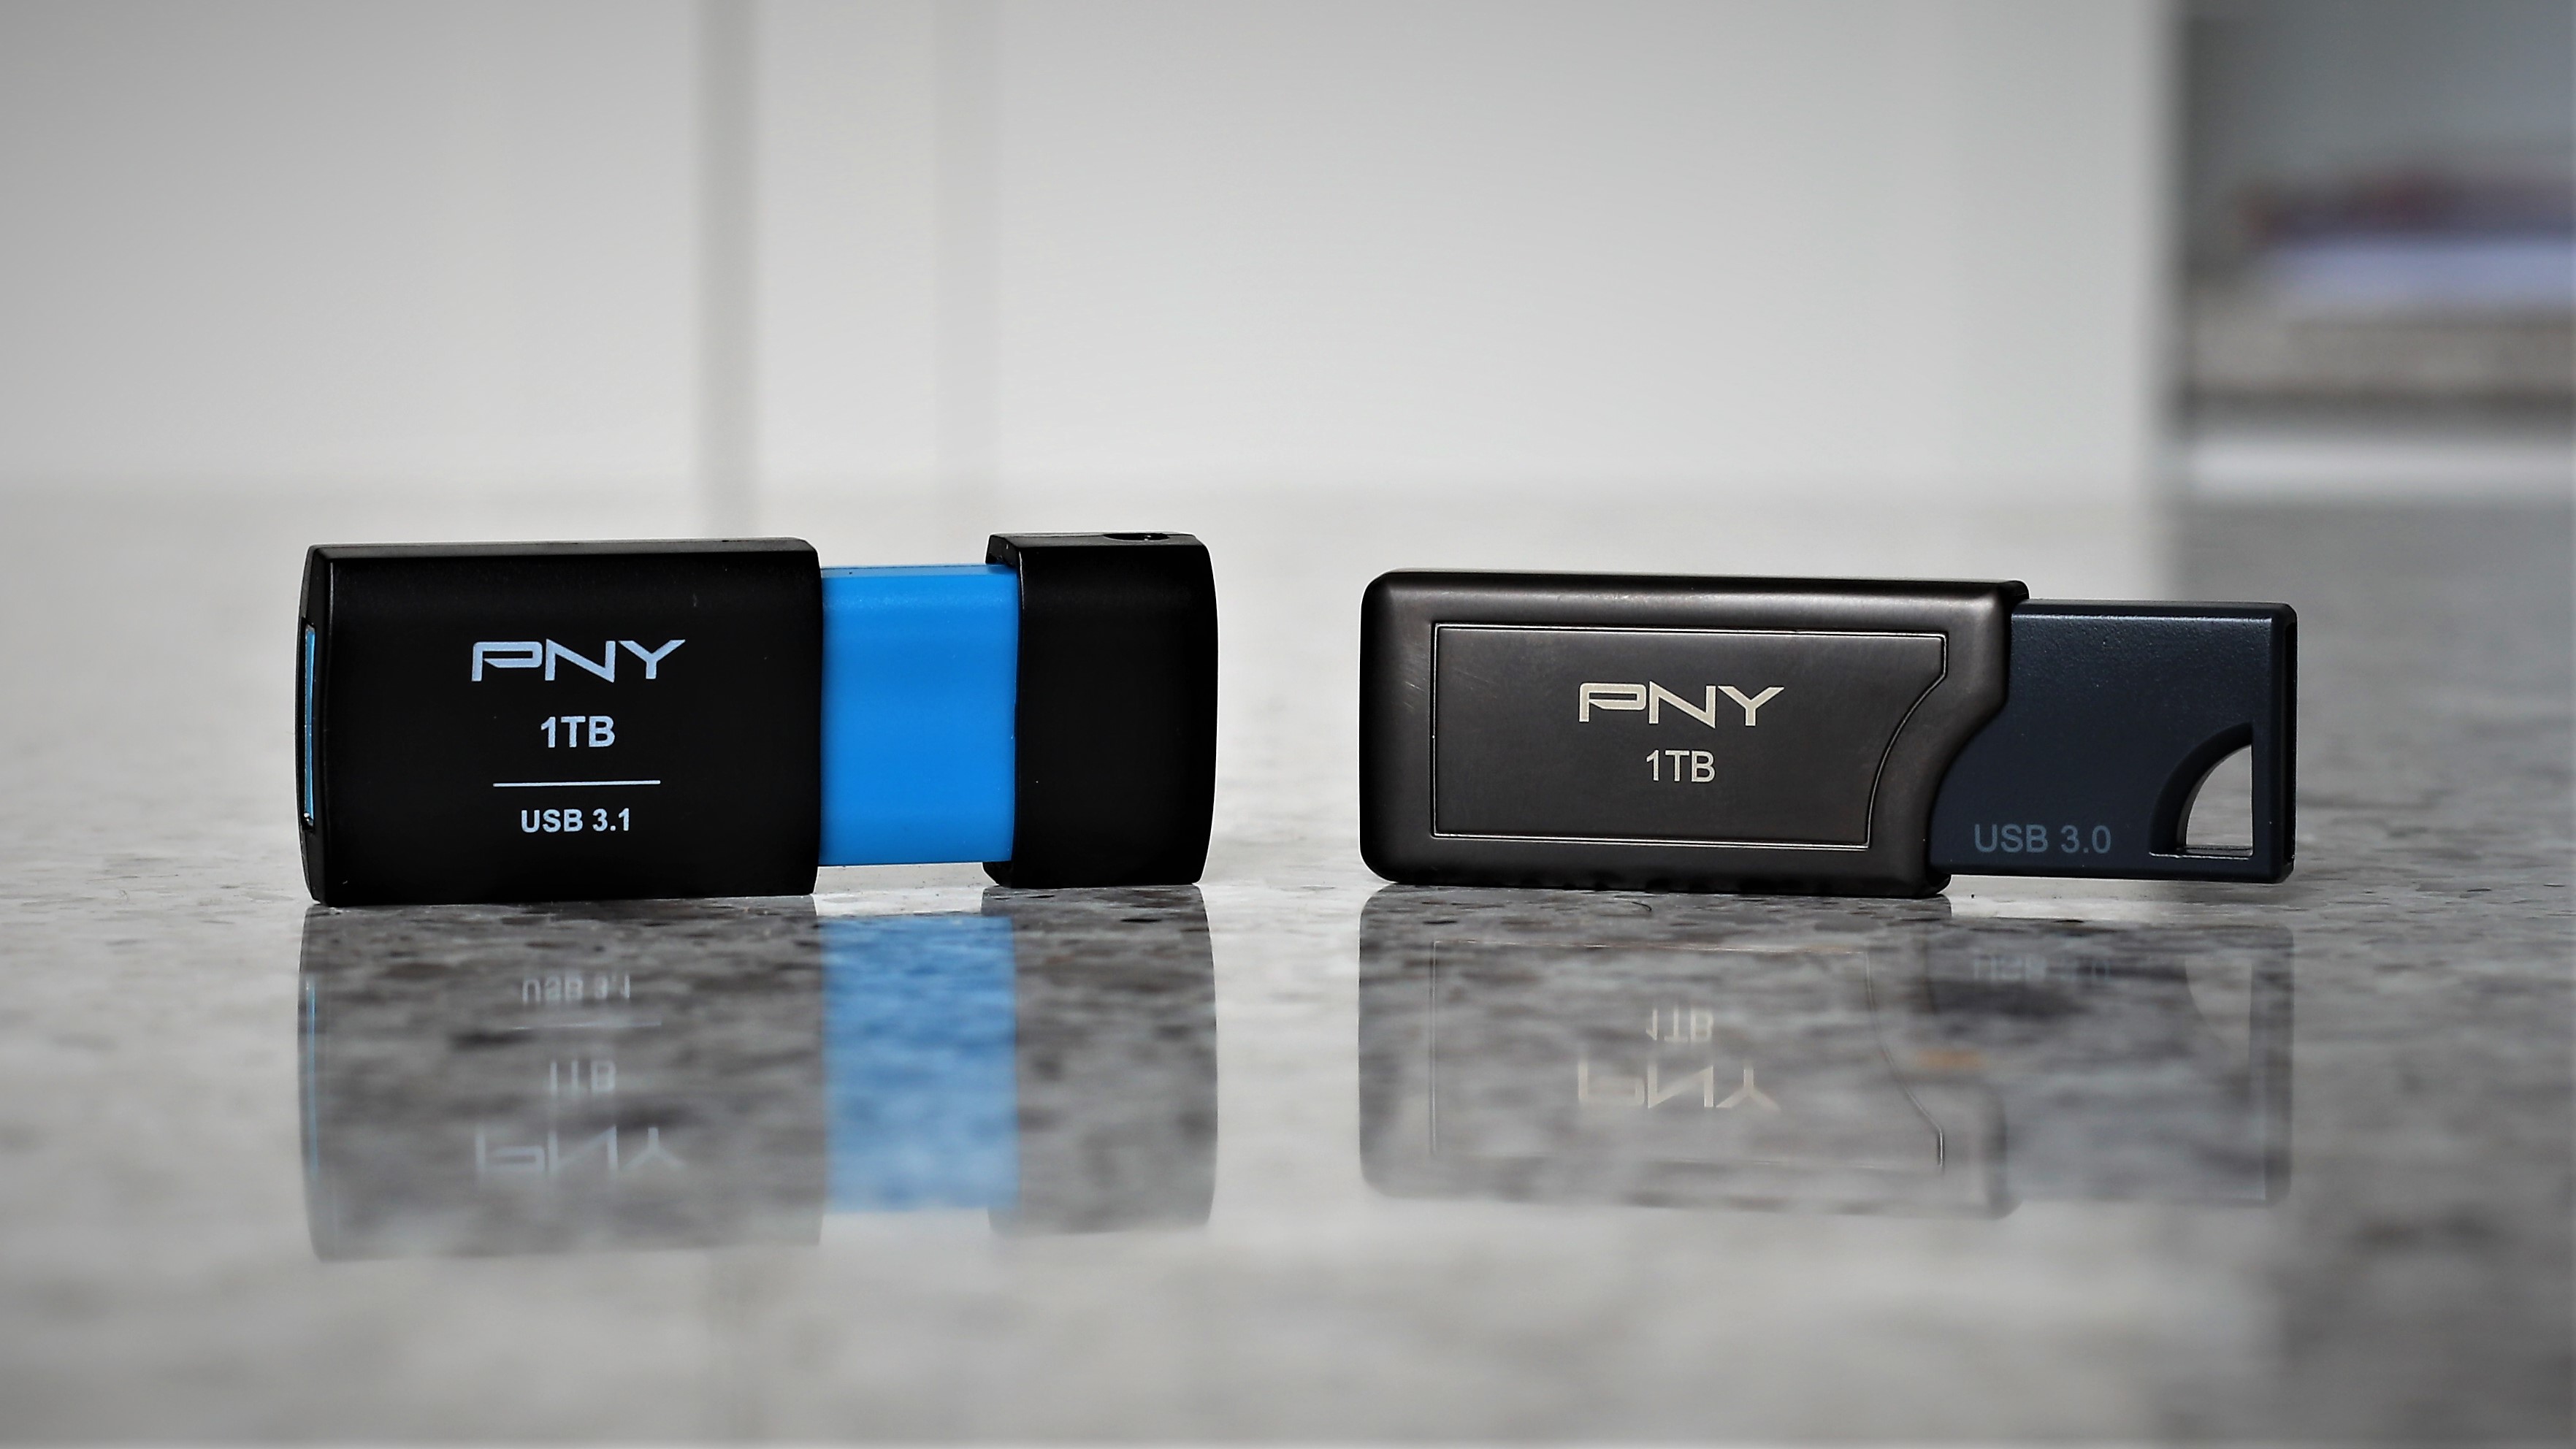 PNY 1TB Pro Elite and X USB 3.0/1 Flash Drive Review - High Capacity and Speed in a Very Small Footprint | The SSD Review